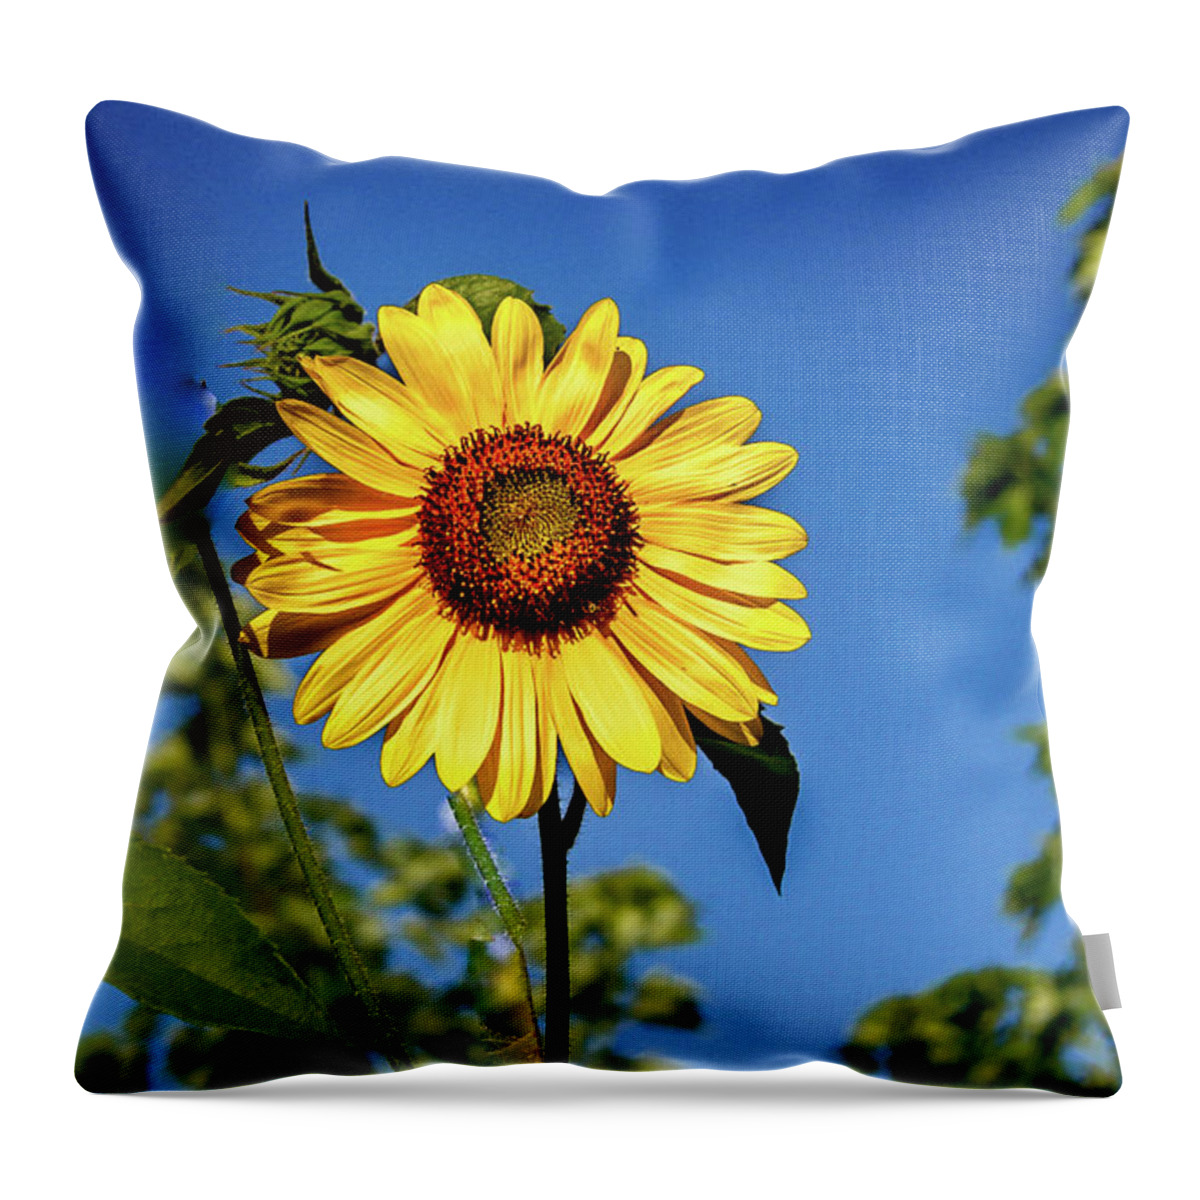 Sunflower Throw Pillow featuring the photograph Looking Up At A Sunflower by Robert Bales